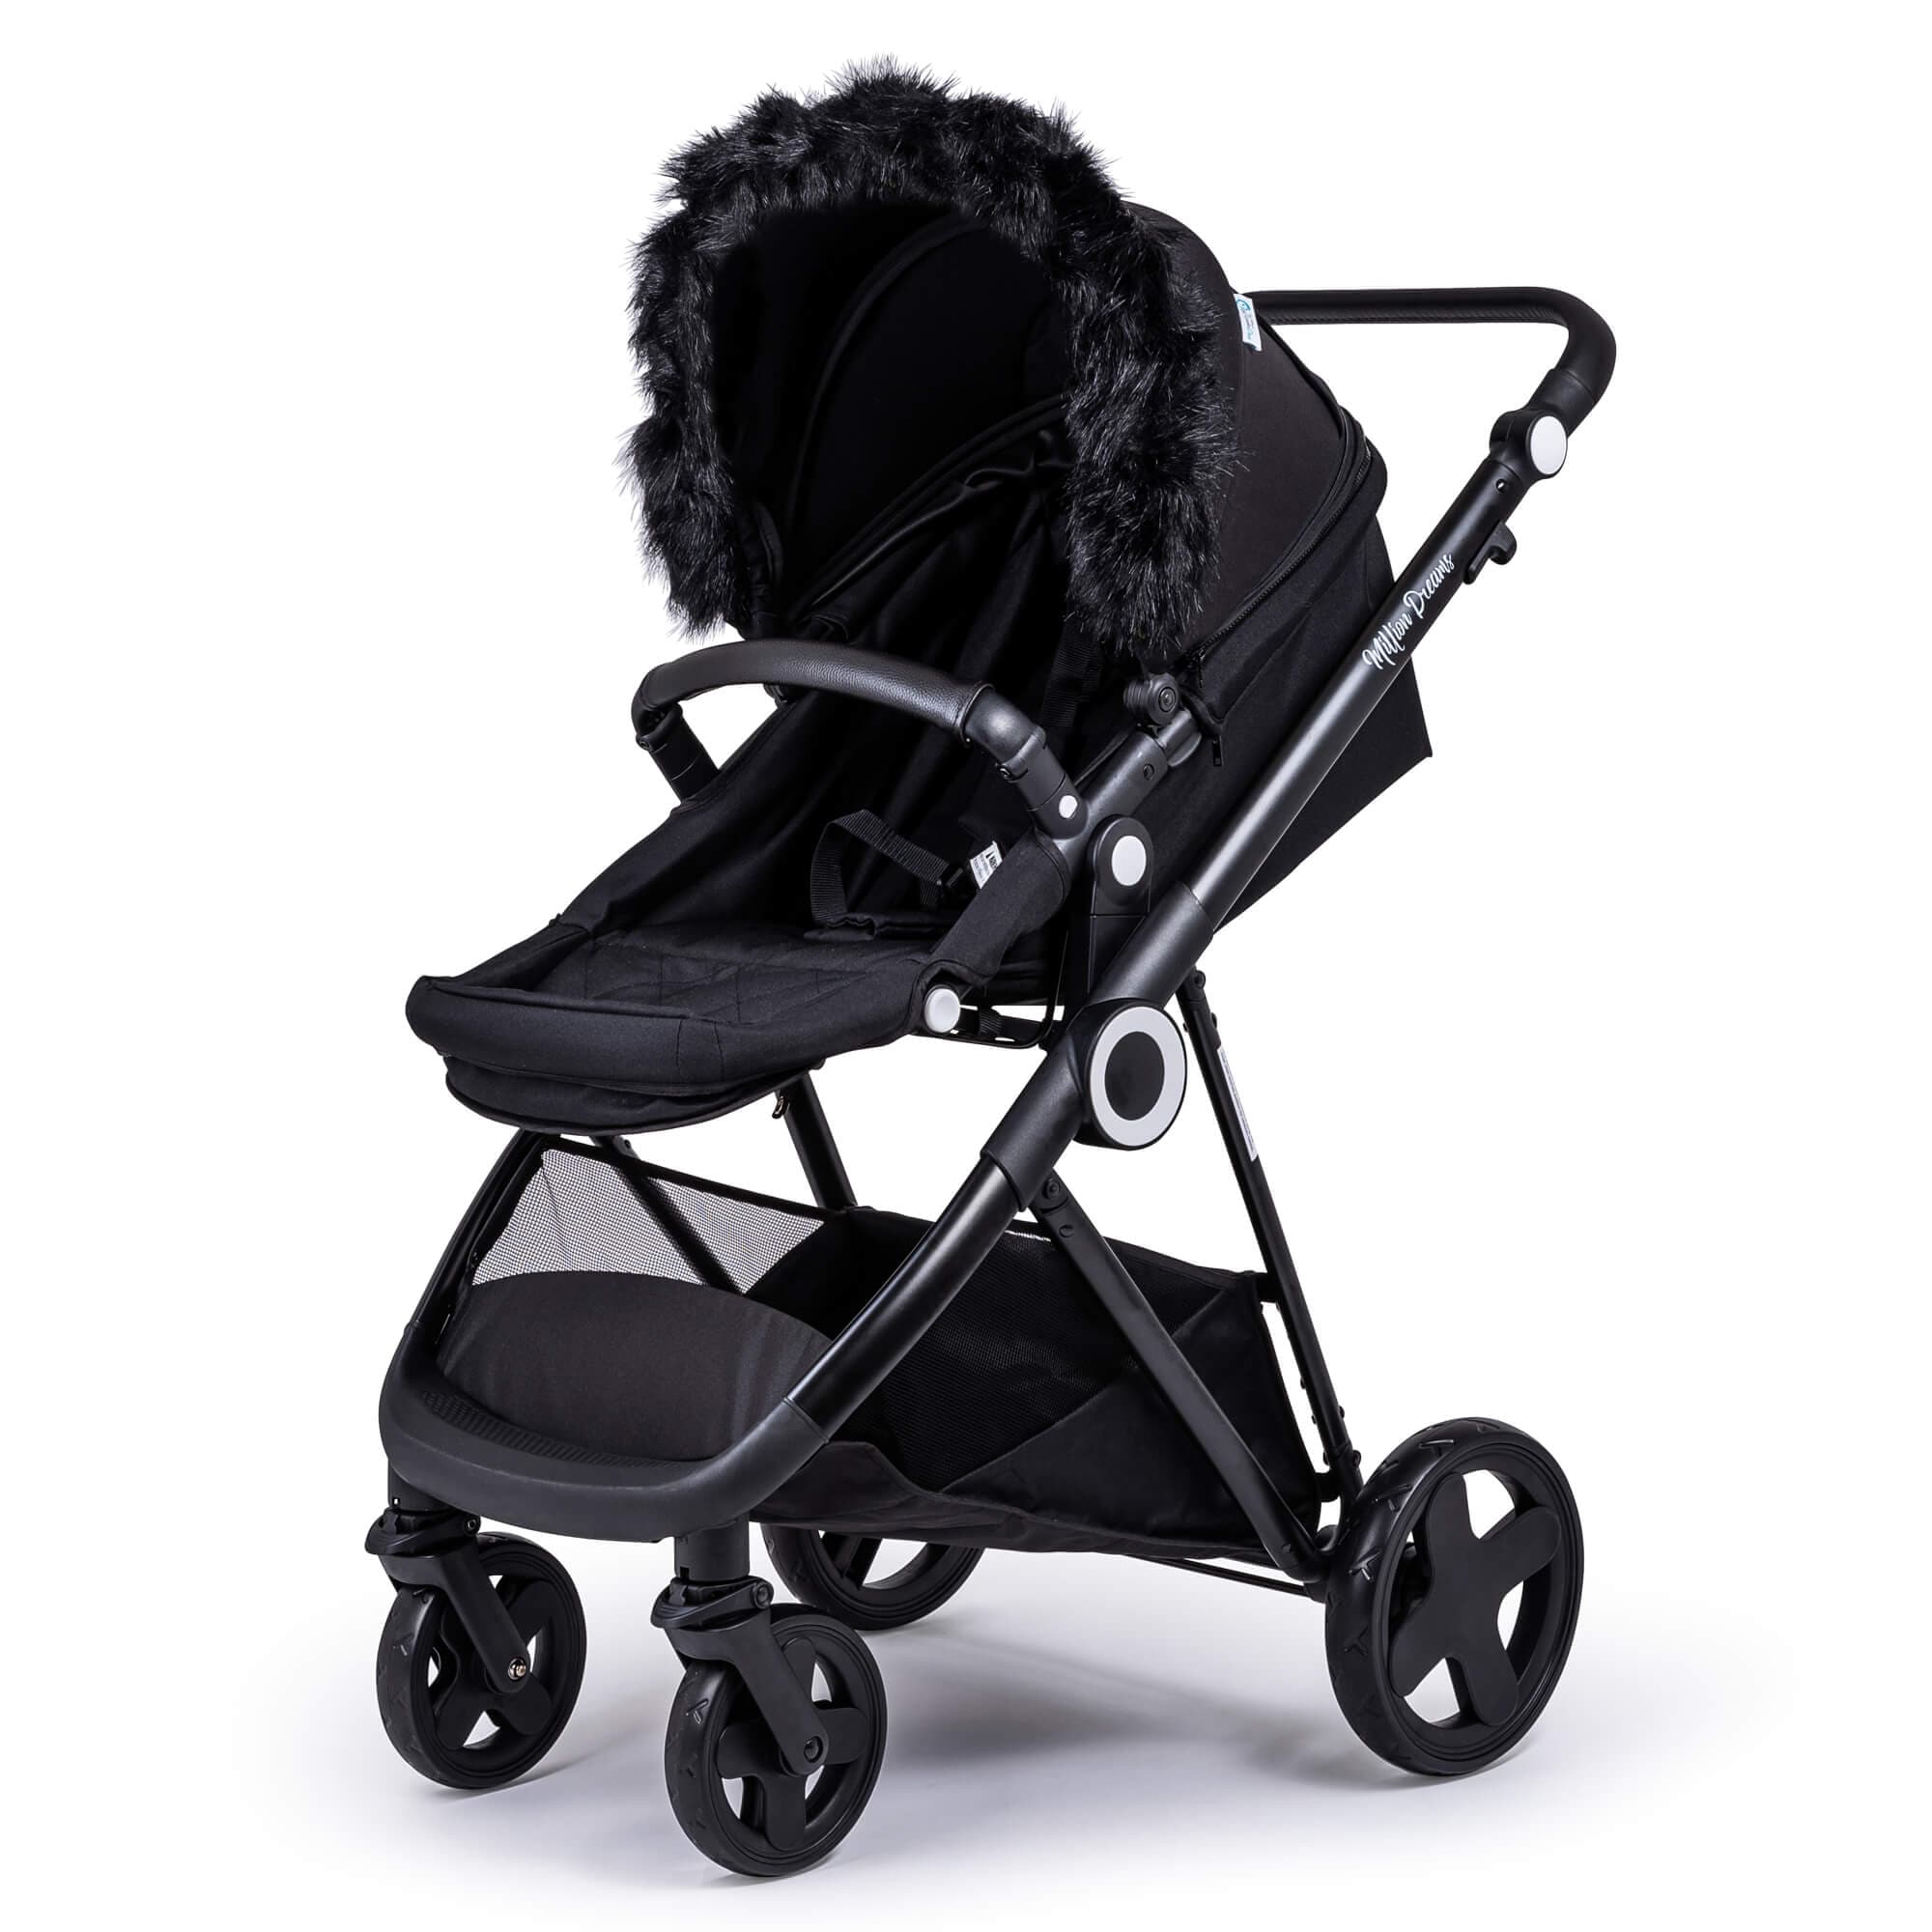 Pram Fur Hood Trim Attachment for Pushchair Compatible with Safety 1st - For Your Little One